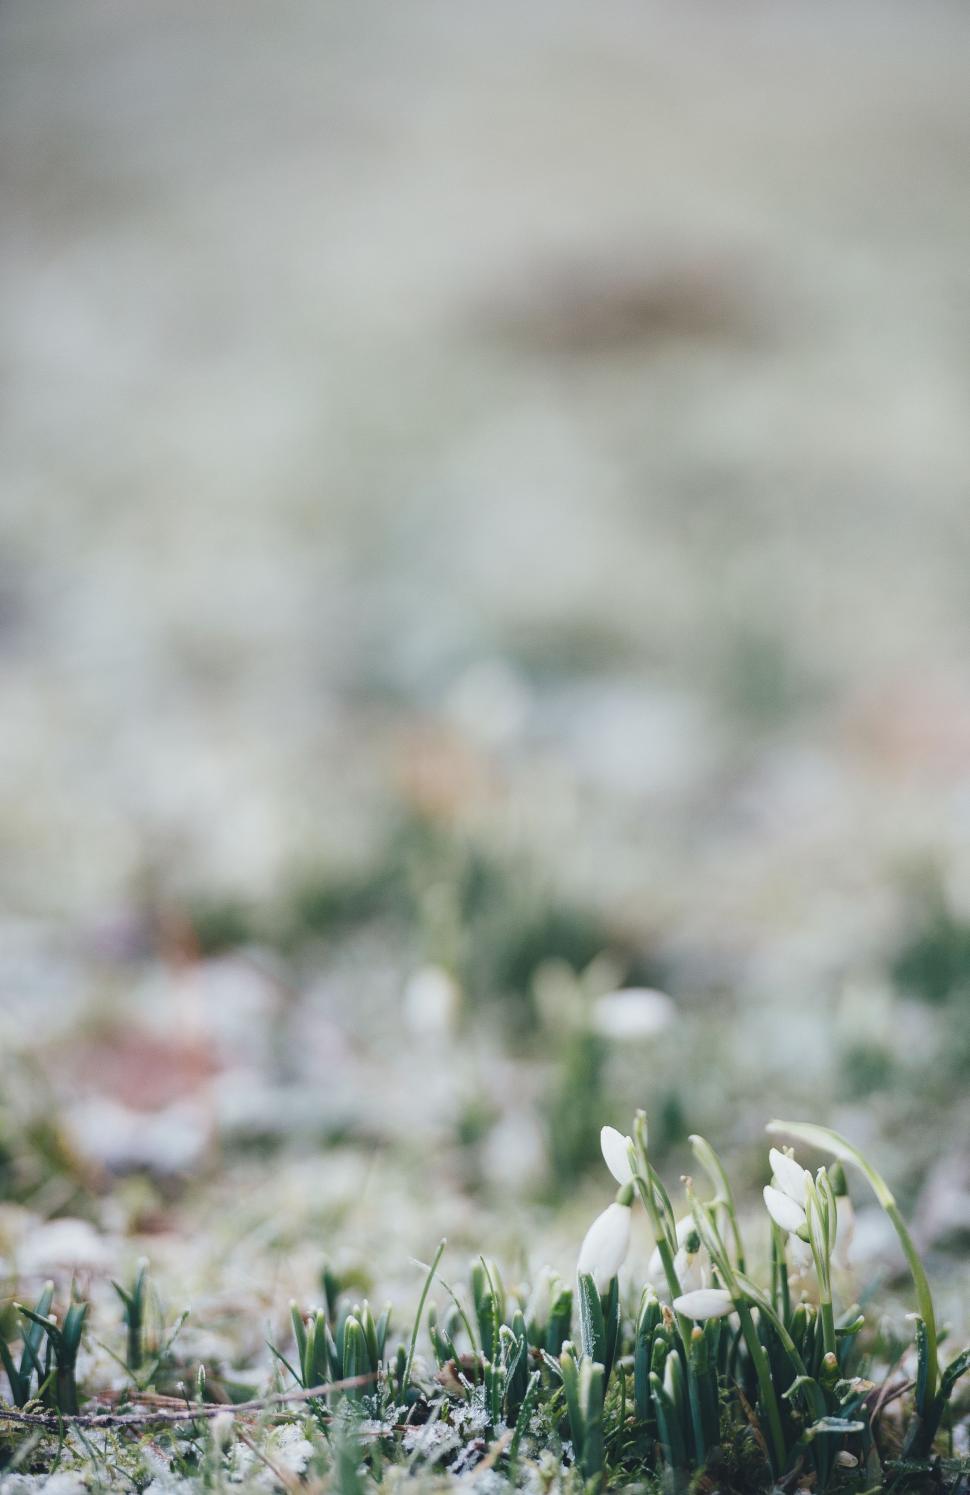 Free Image of Close Up of Grass and Flowers 